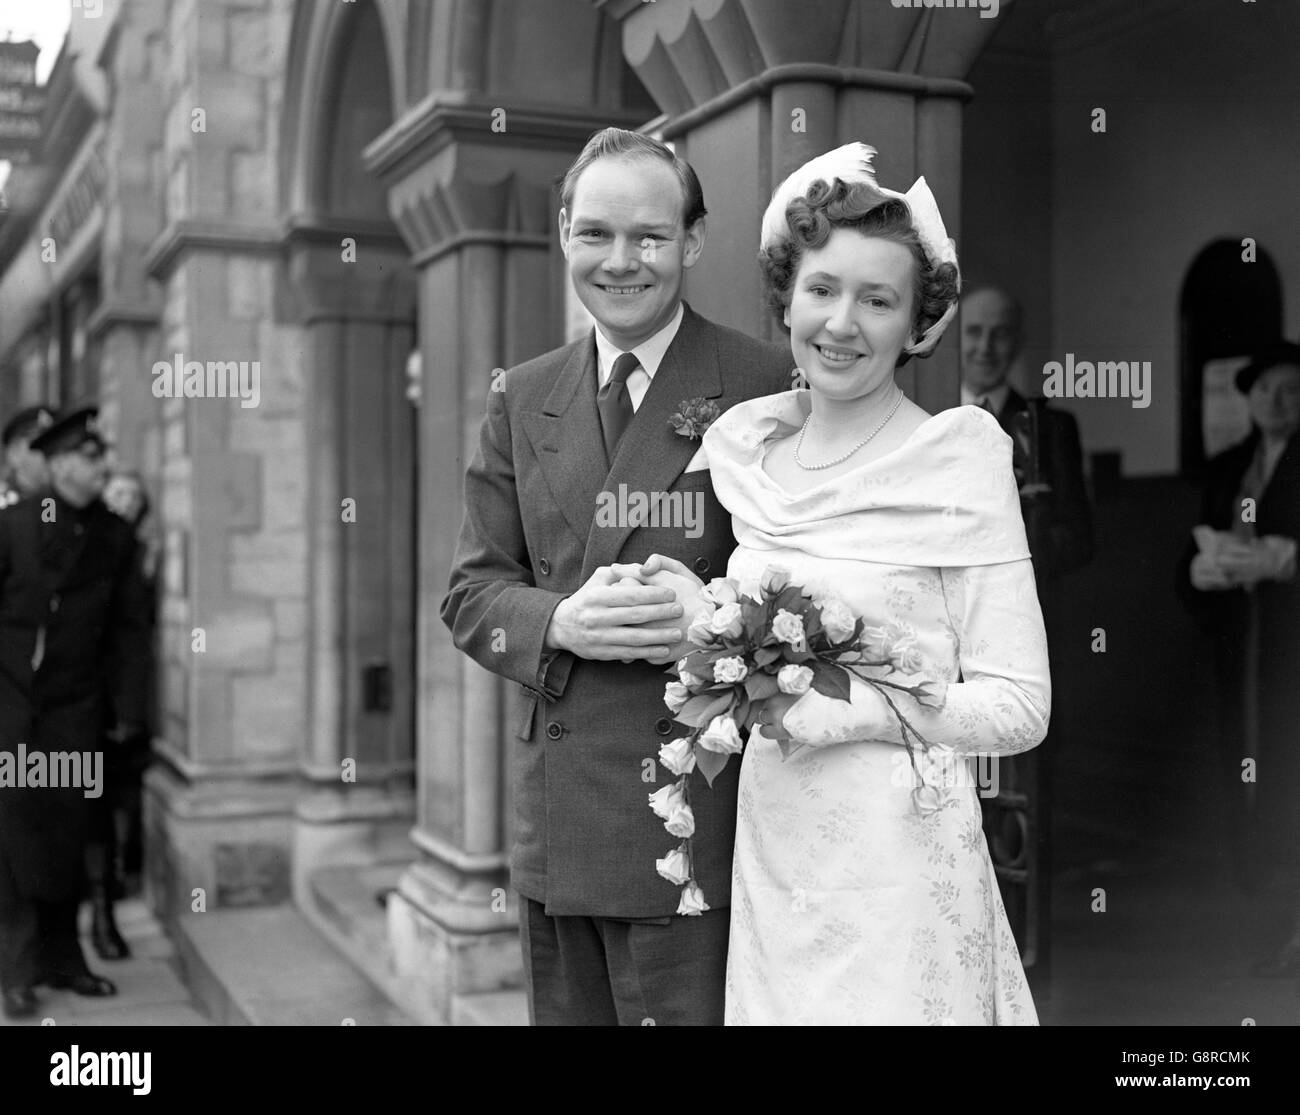 Wedding Day - Jean Metcalfe and Cliff Michelmore - Congregational ...